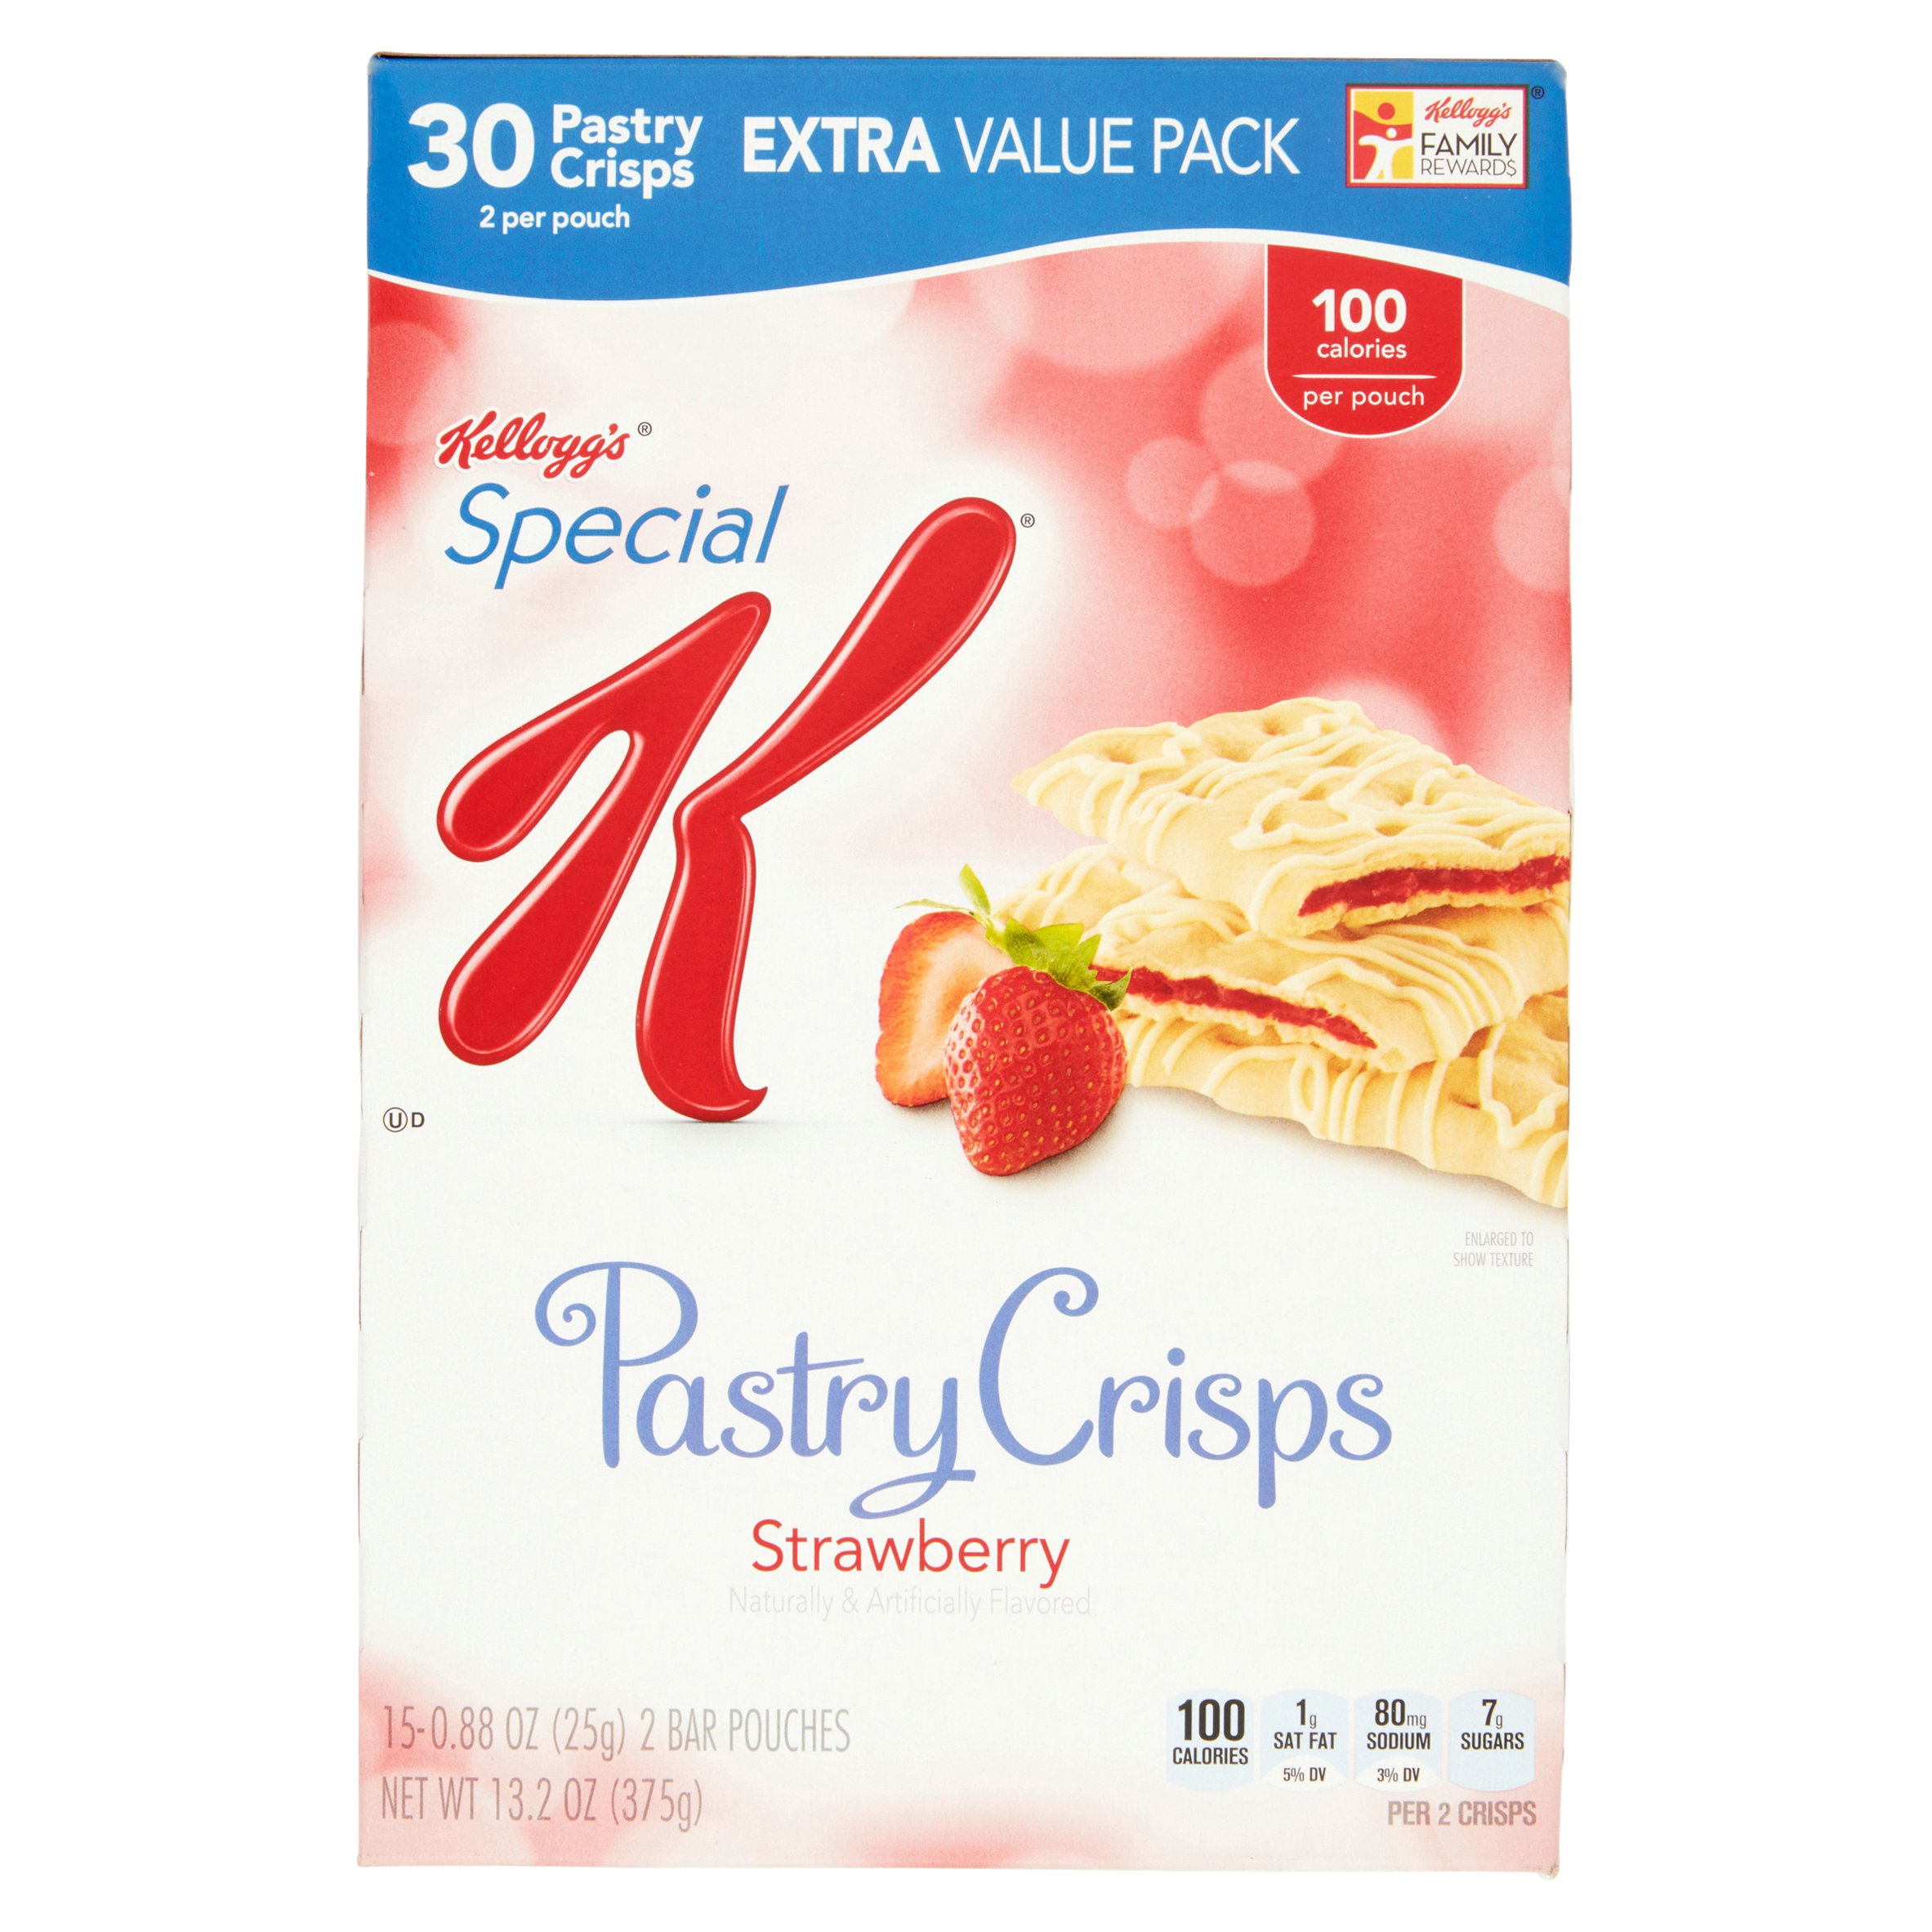 Kellogg's Special K Strawberry Pastry Crisps, 0.88 oz, 15 count - image 4 of 5